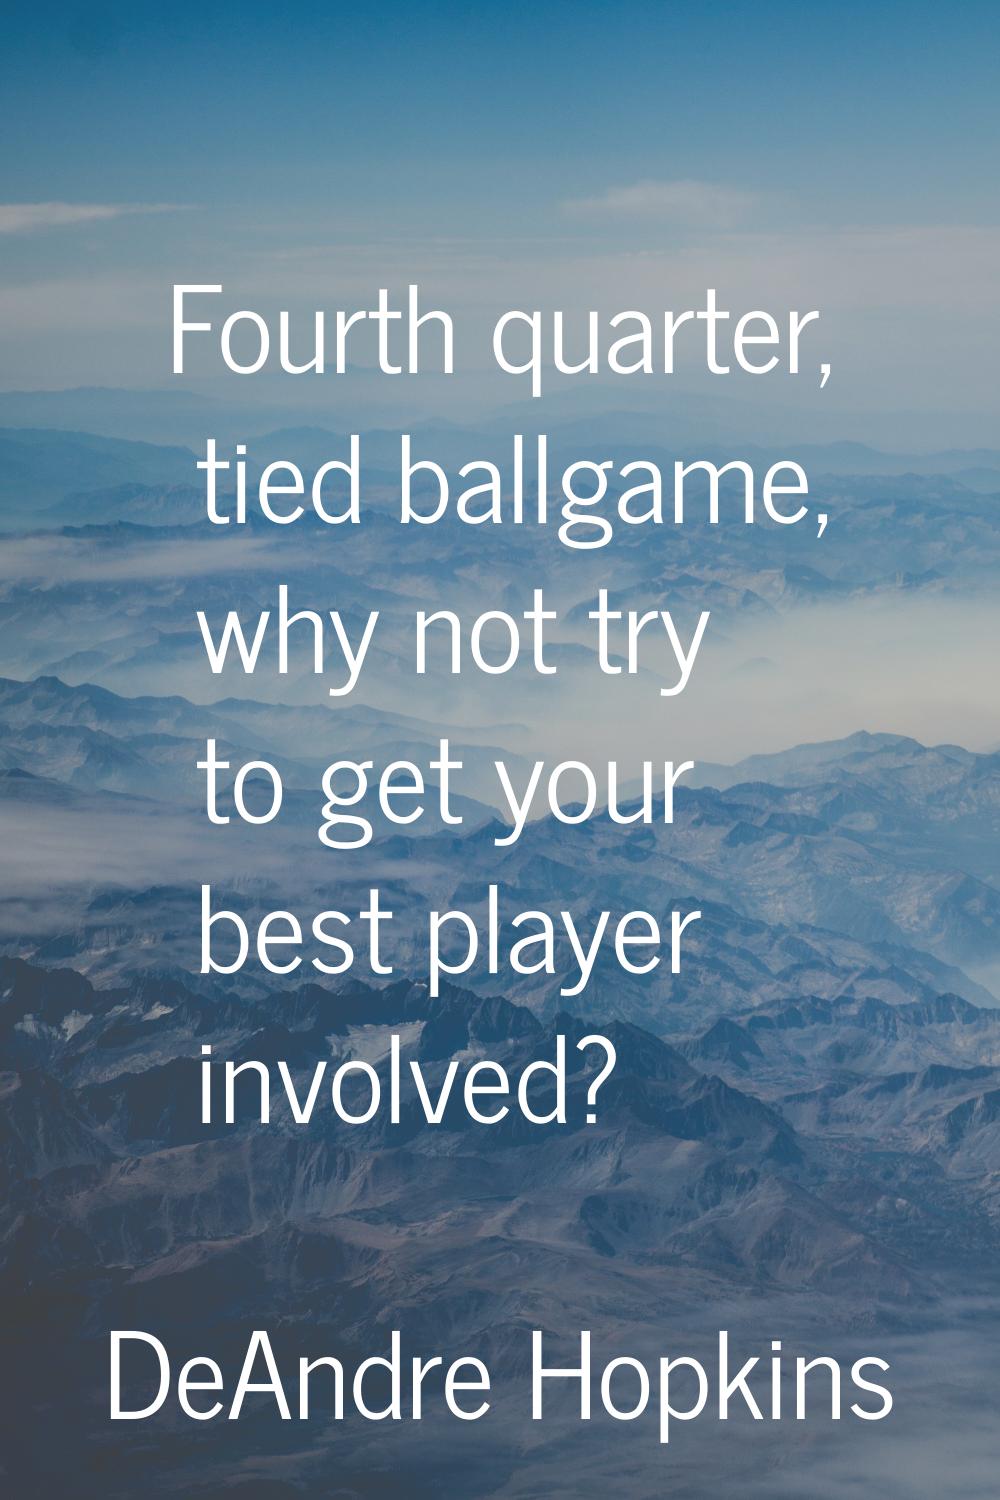 Fourth quarter, tied ballgame, why not try to get your best player involved?